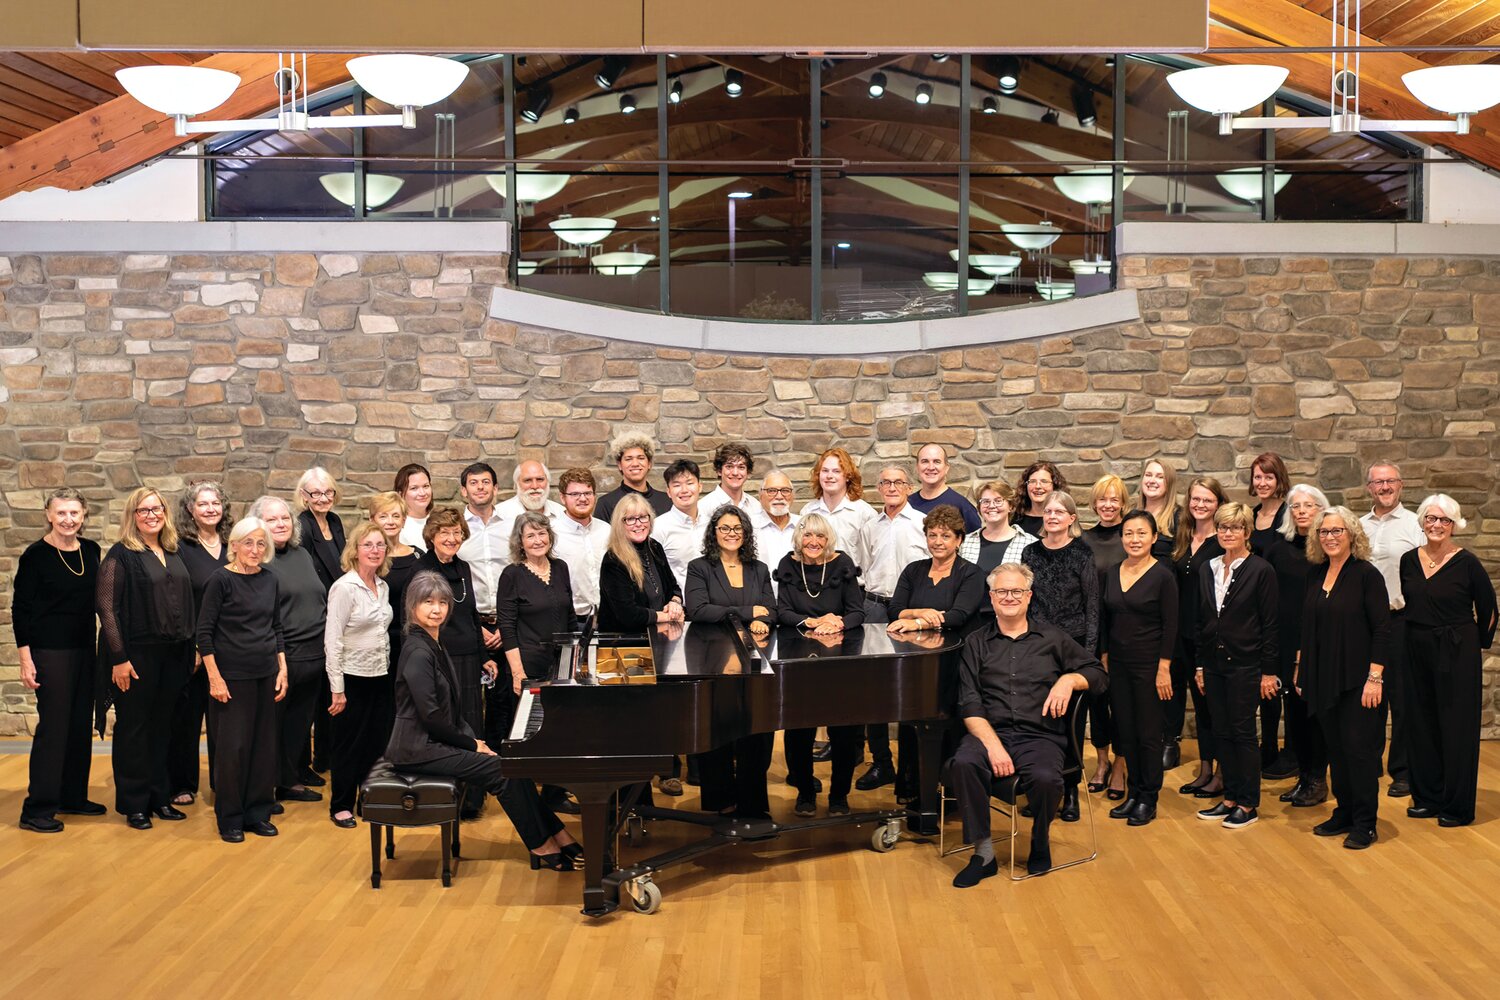 Voices Chorale NJ presents “Fields of Gold: Songs in the Key of Hope,” May 13, in Princeton, N.J.